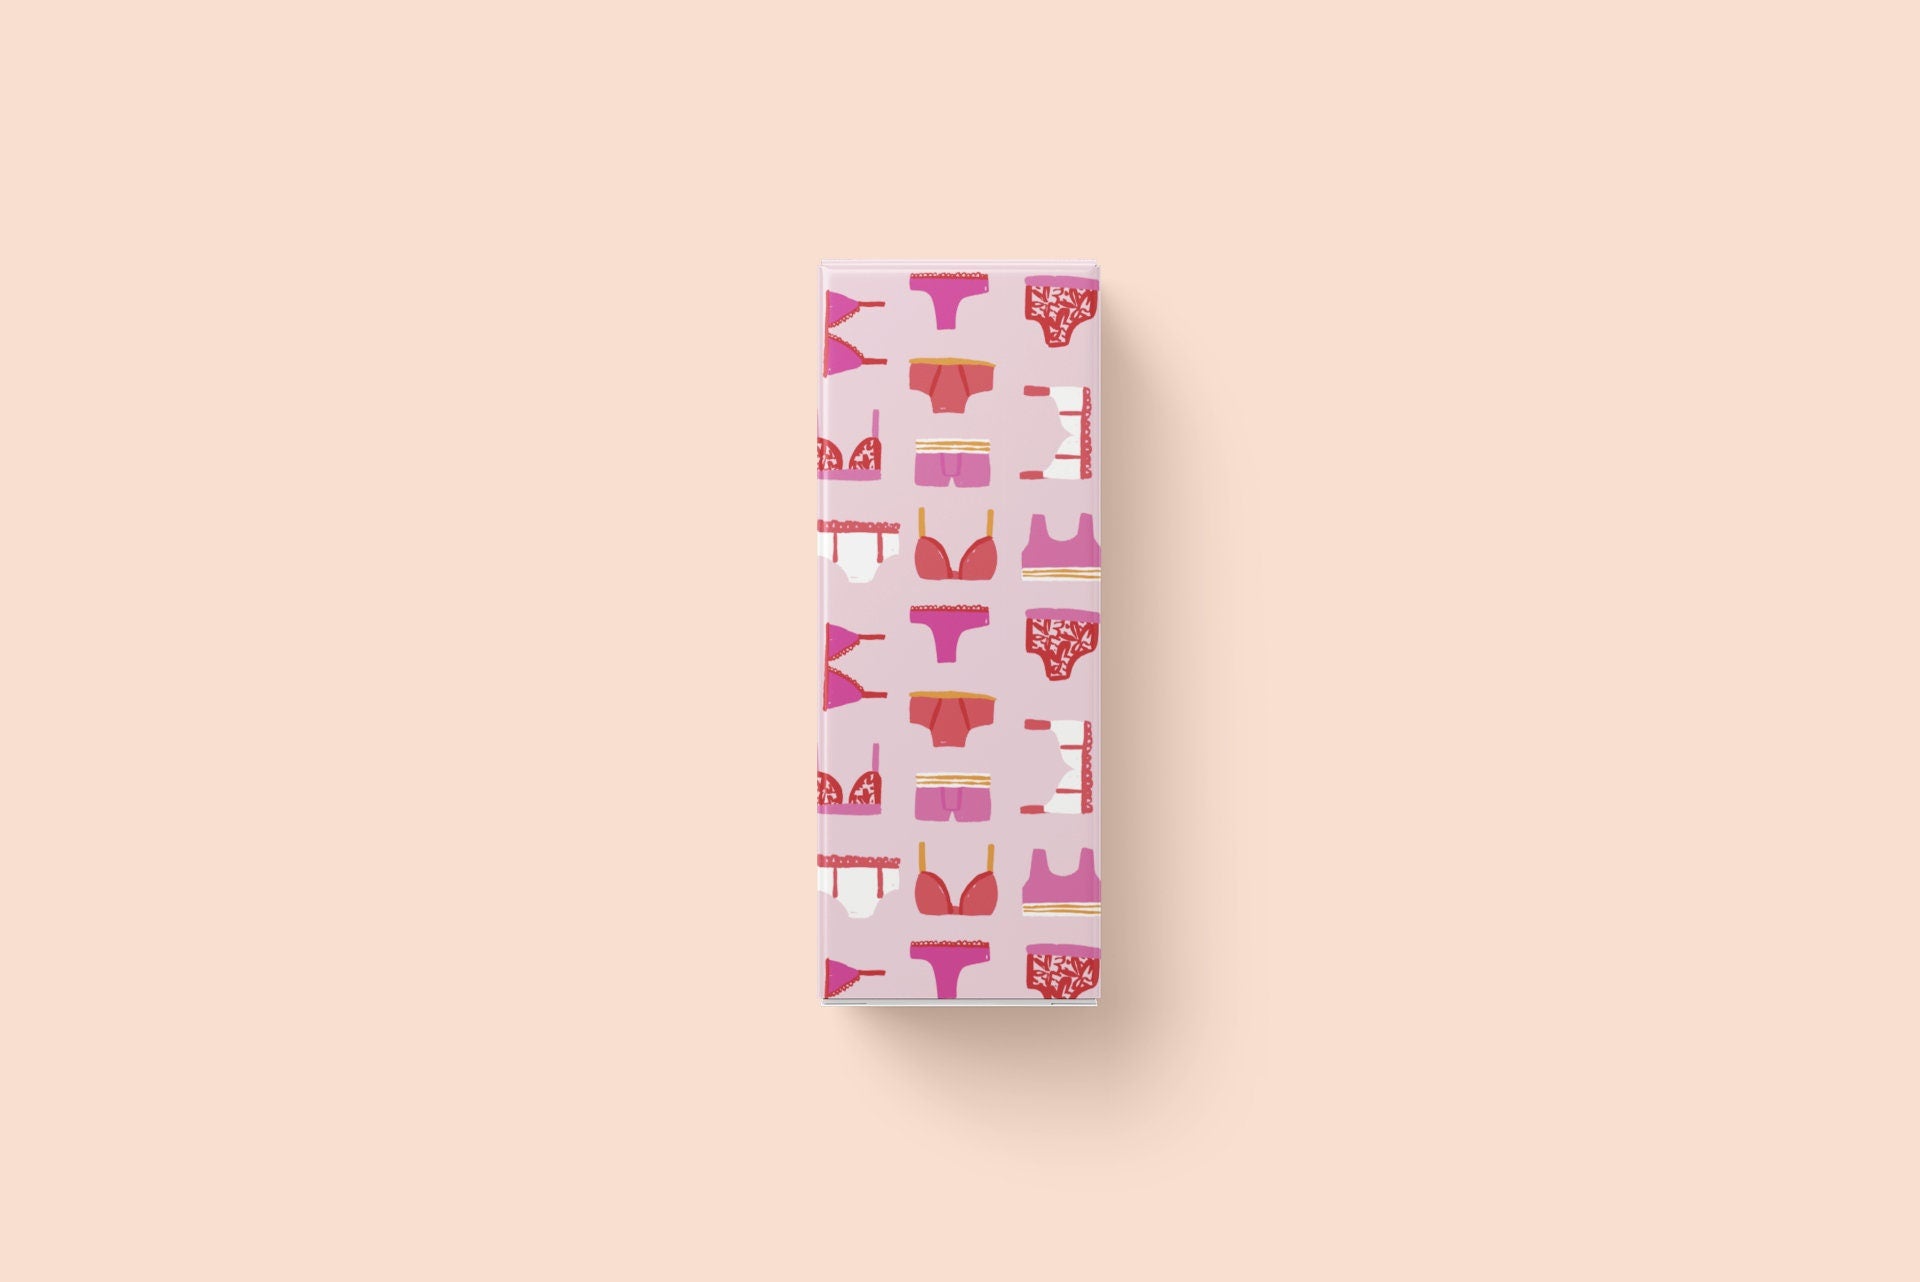 Pink Lingerie Wrapping Paper Alexander's 